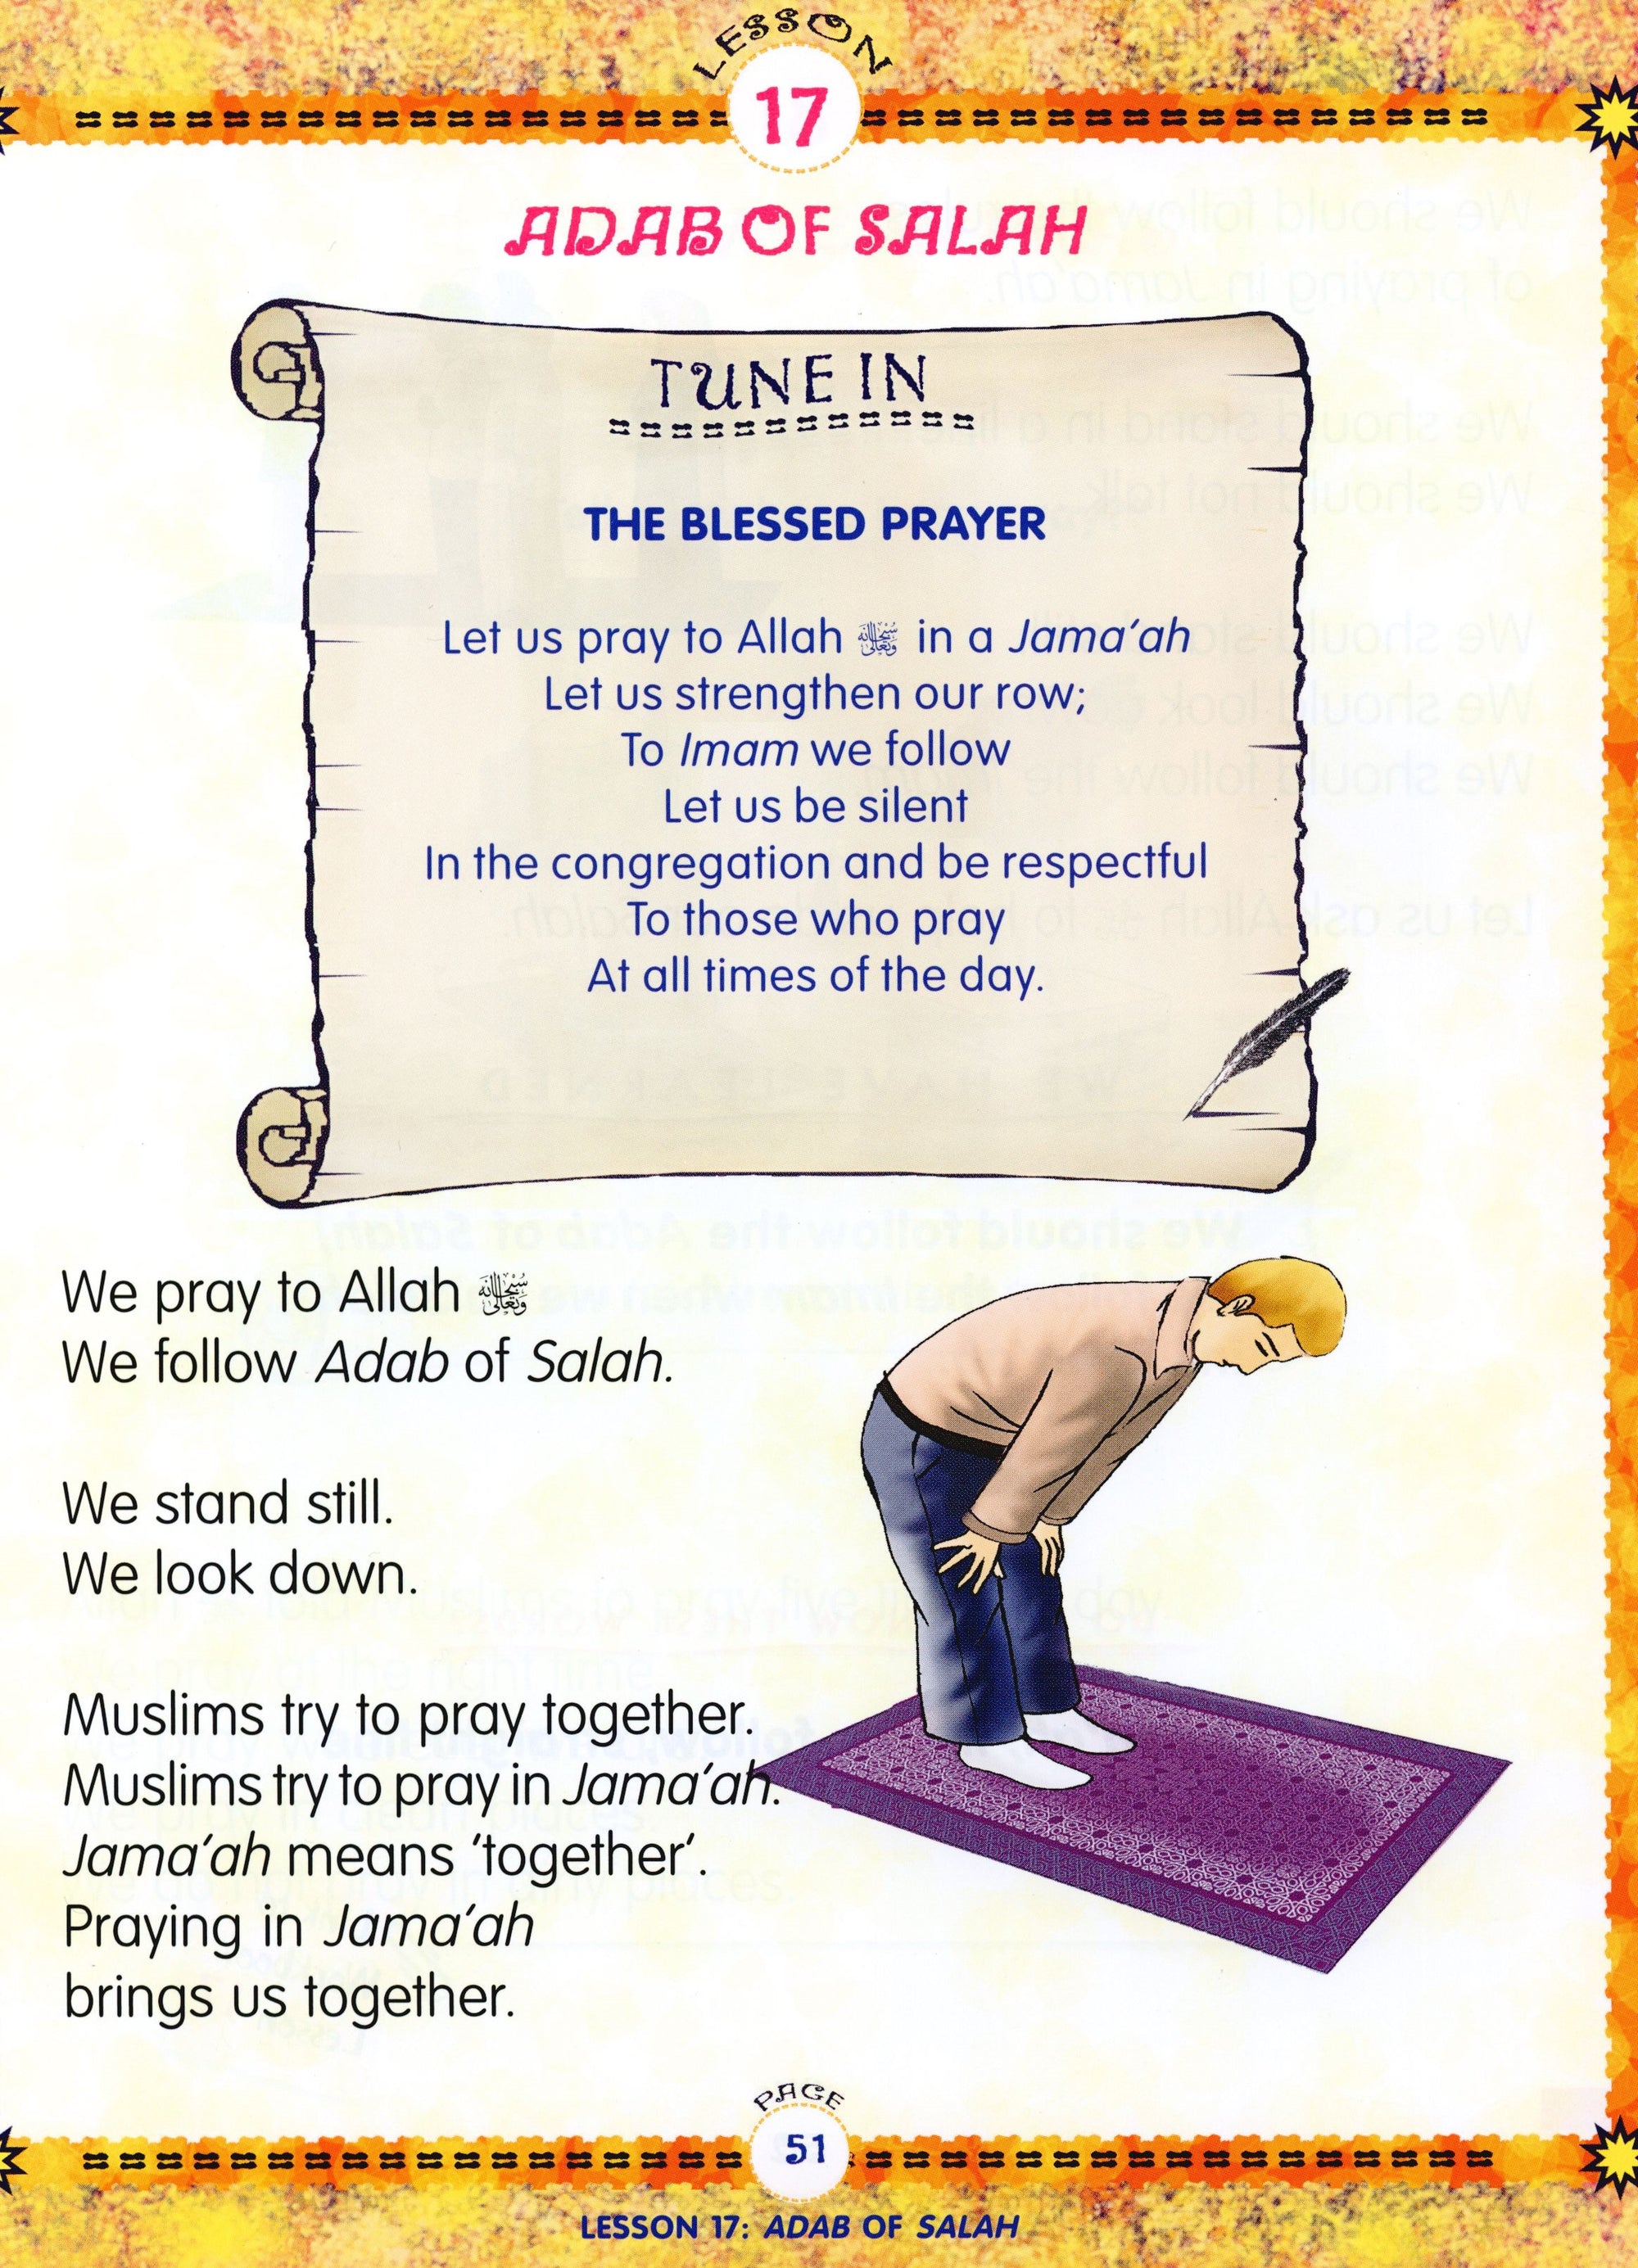 We Are Muslims Textbook Grade 1